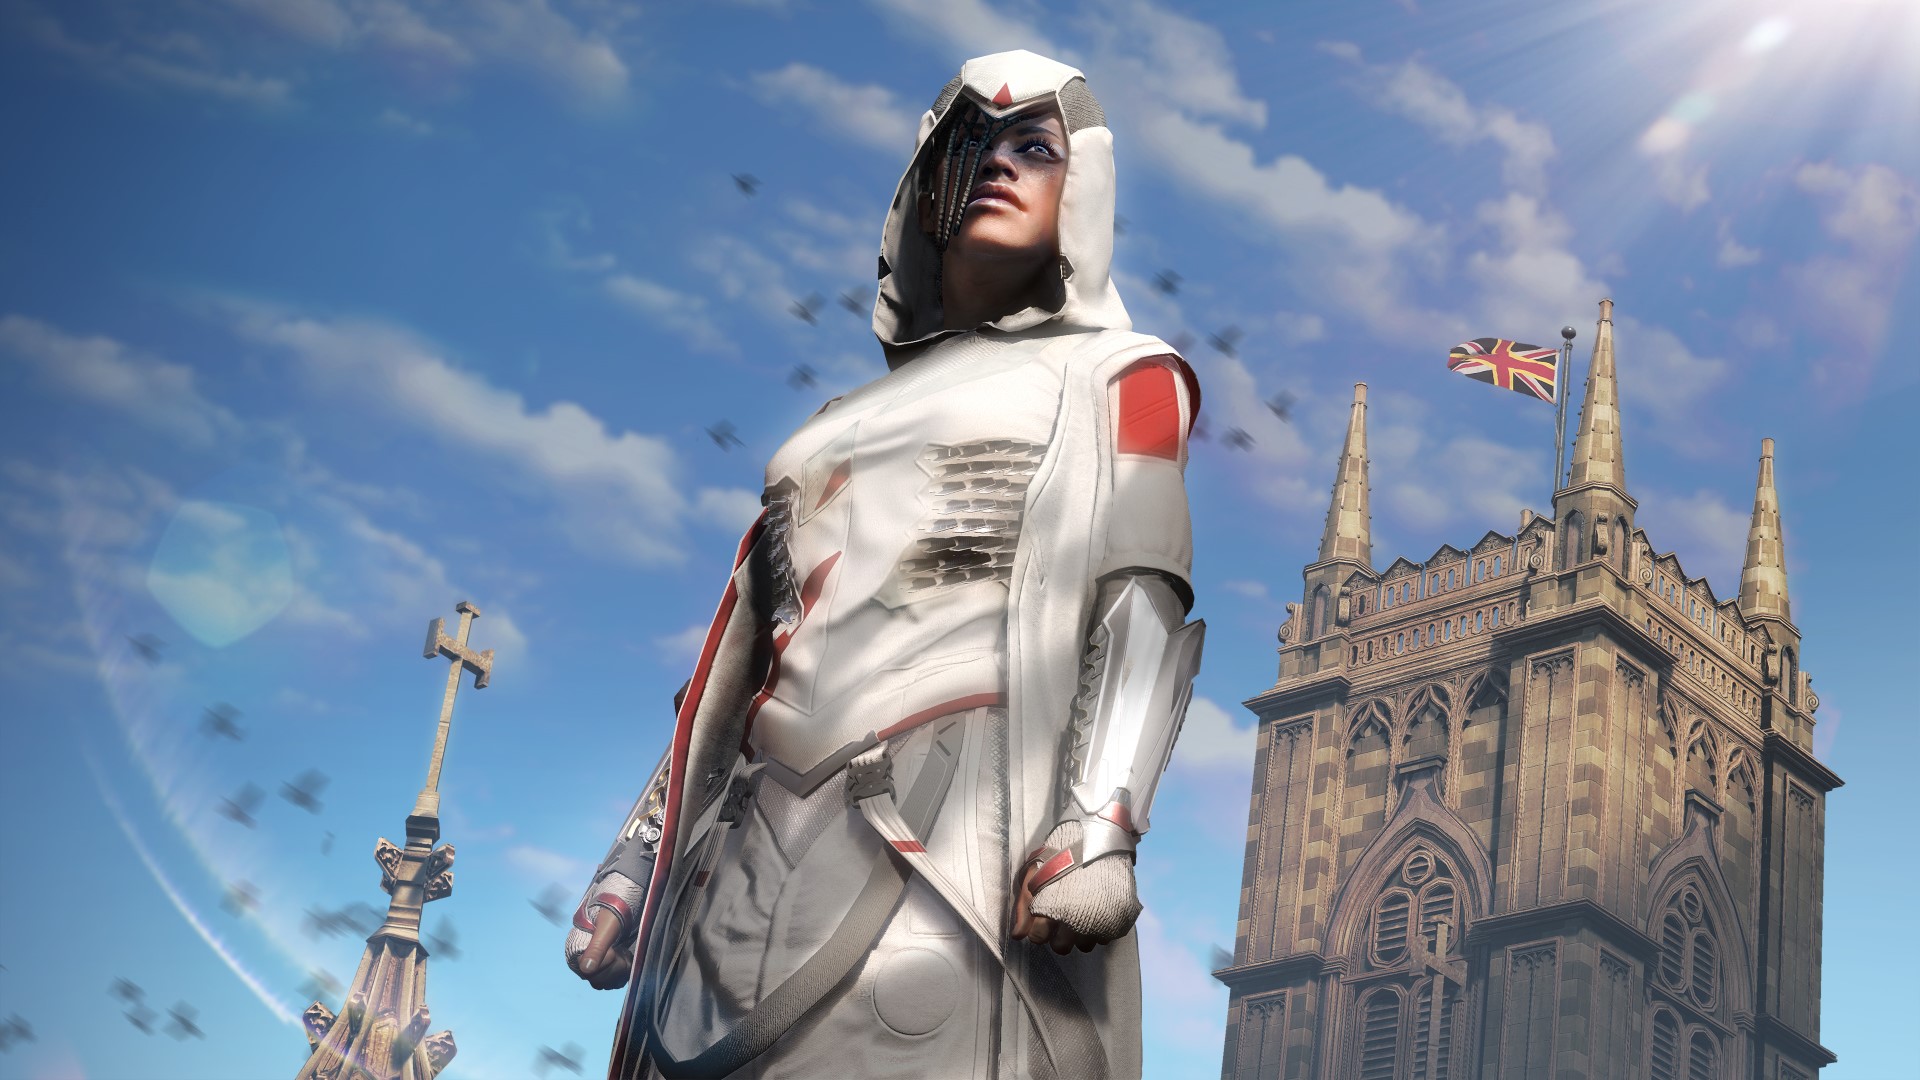 Watch Dogs: Legion review – The perfect antidote to lockdown